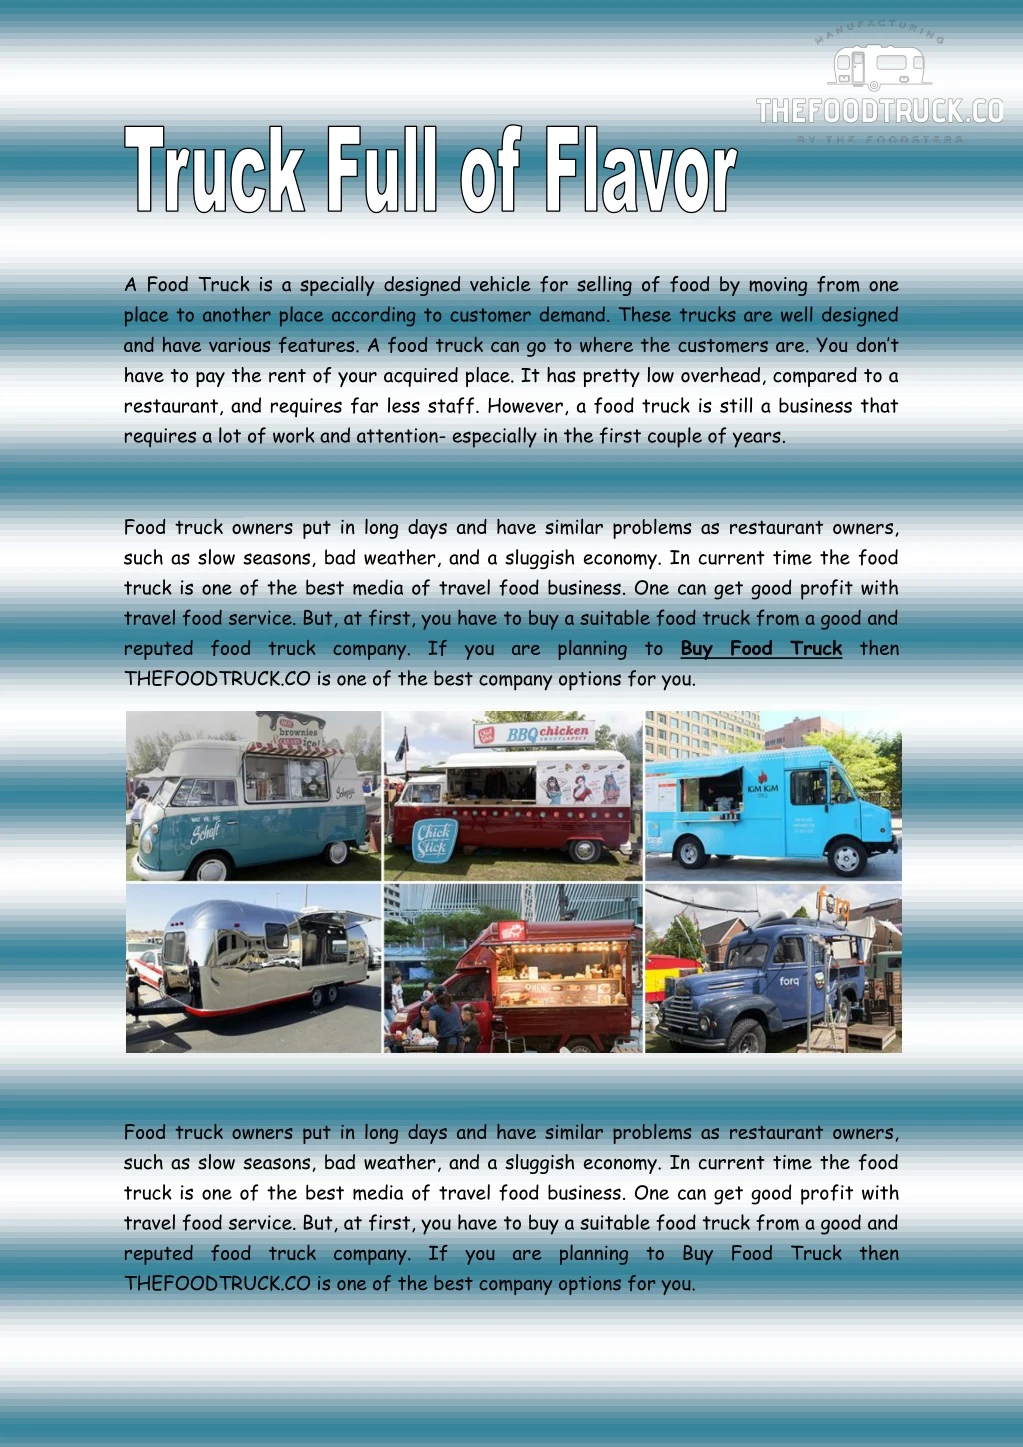 a food truck is a specially designed vehicle